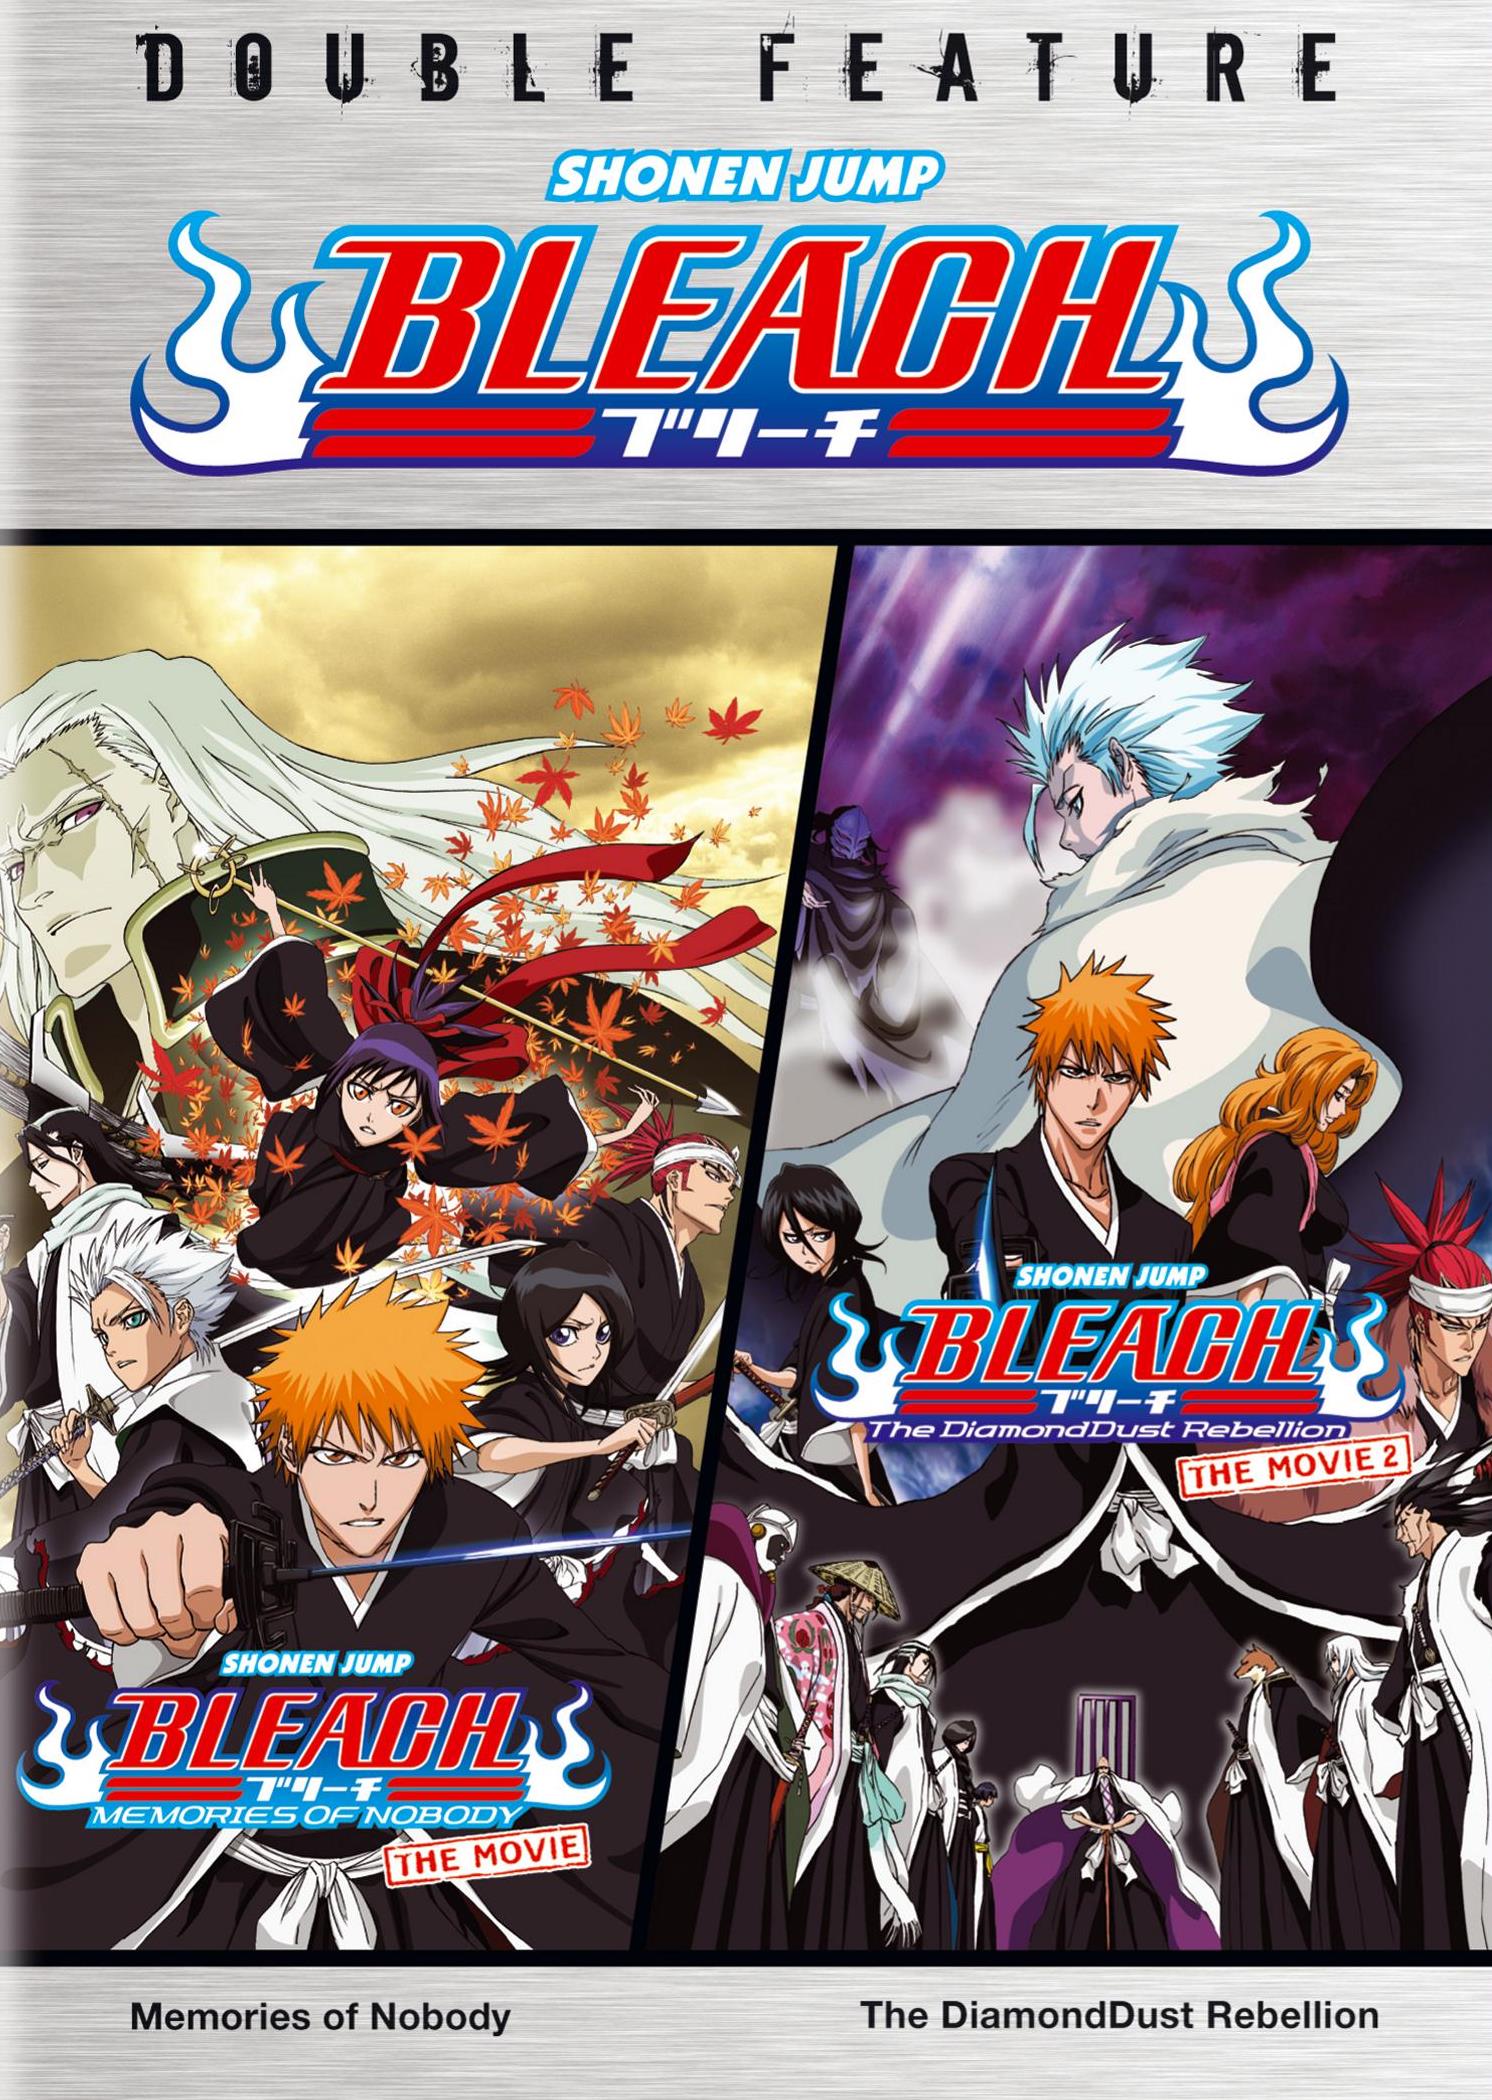 The 1st 2 Episodes are MOVIE QUALITY CONFIRMED!! : r/bleach